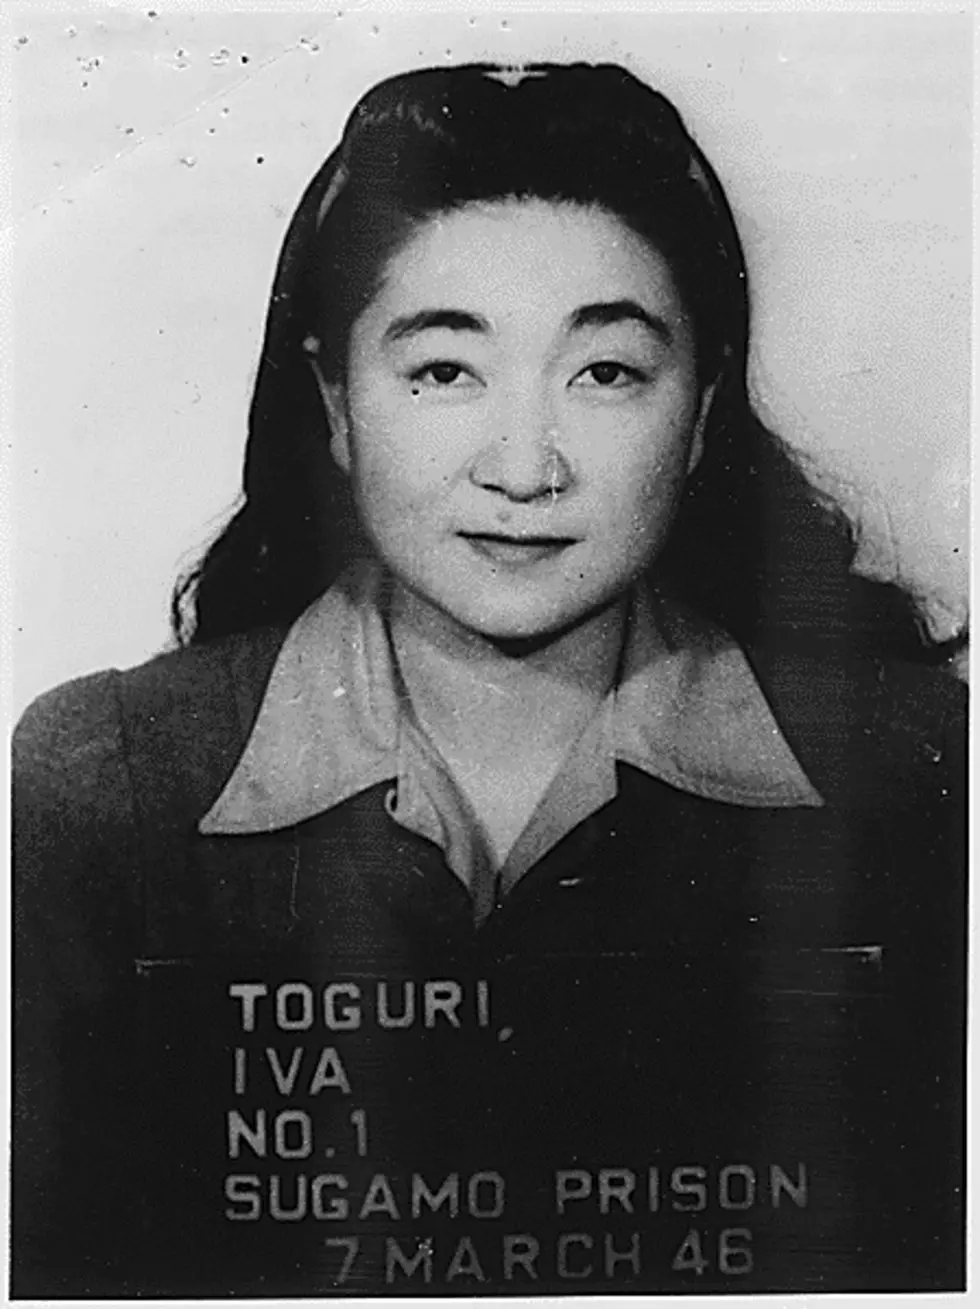 Monday morning read: Tokyo Rose was wrongfully convicted of treason